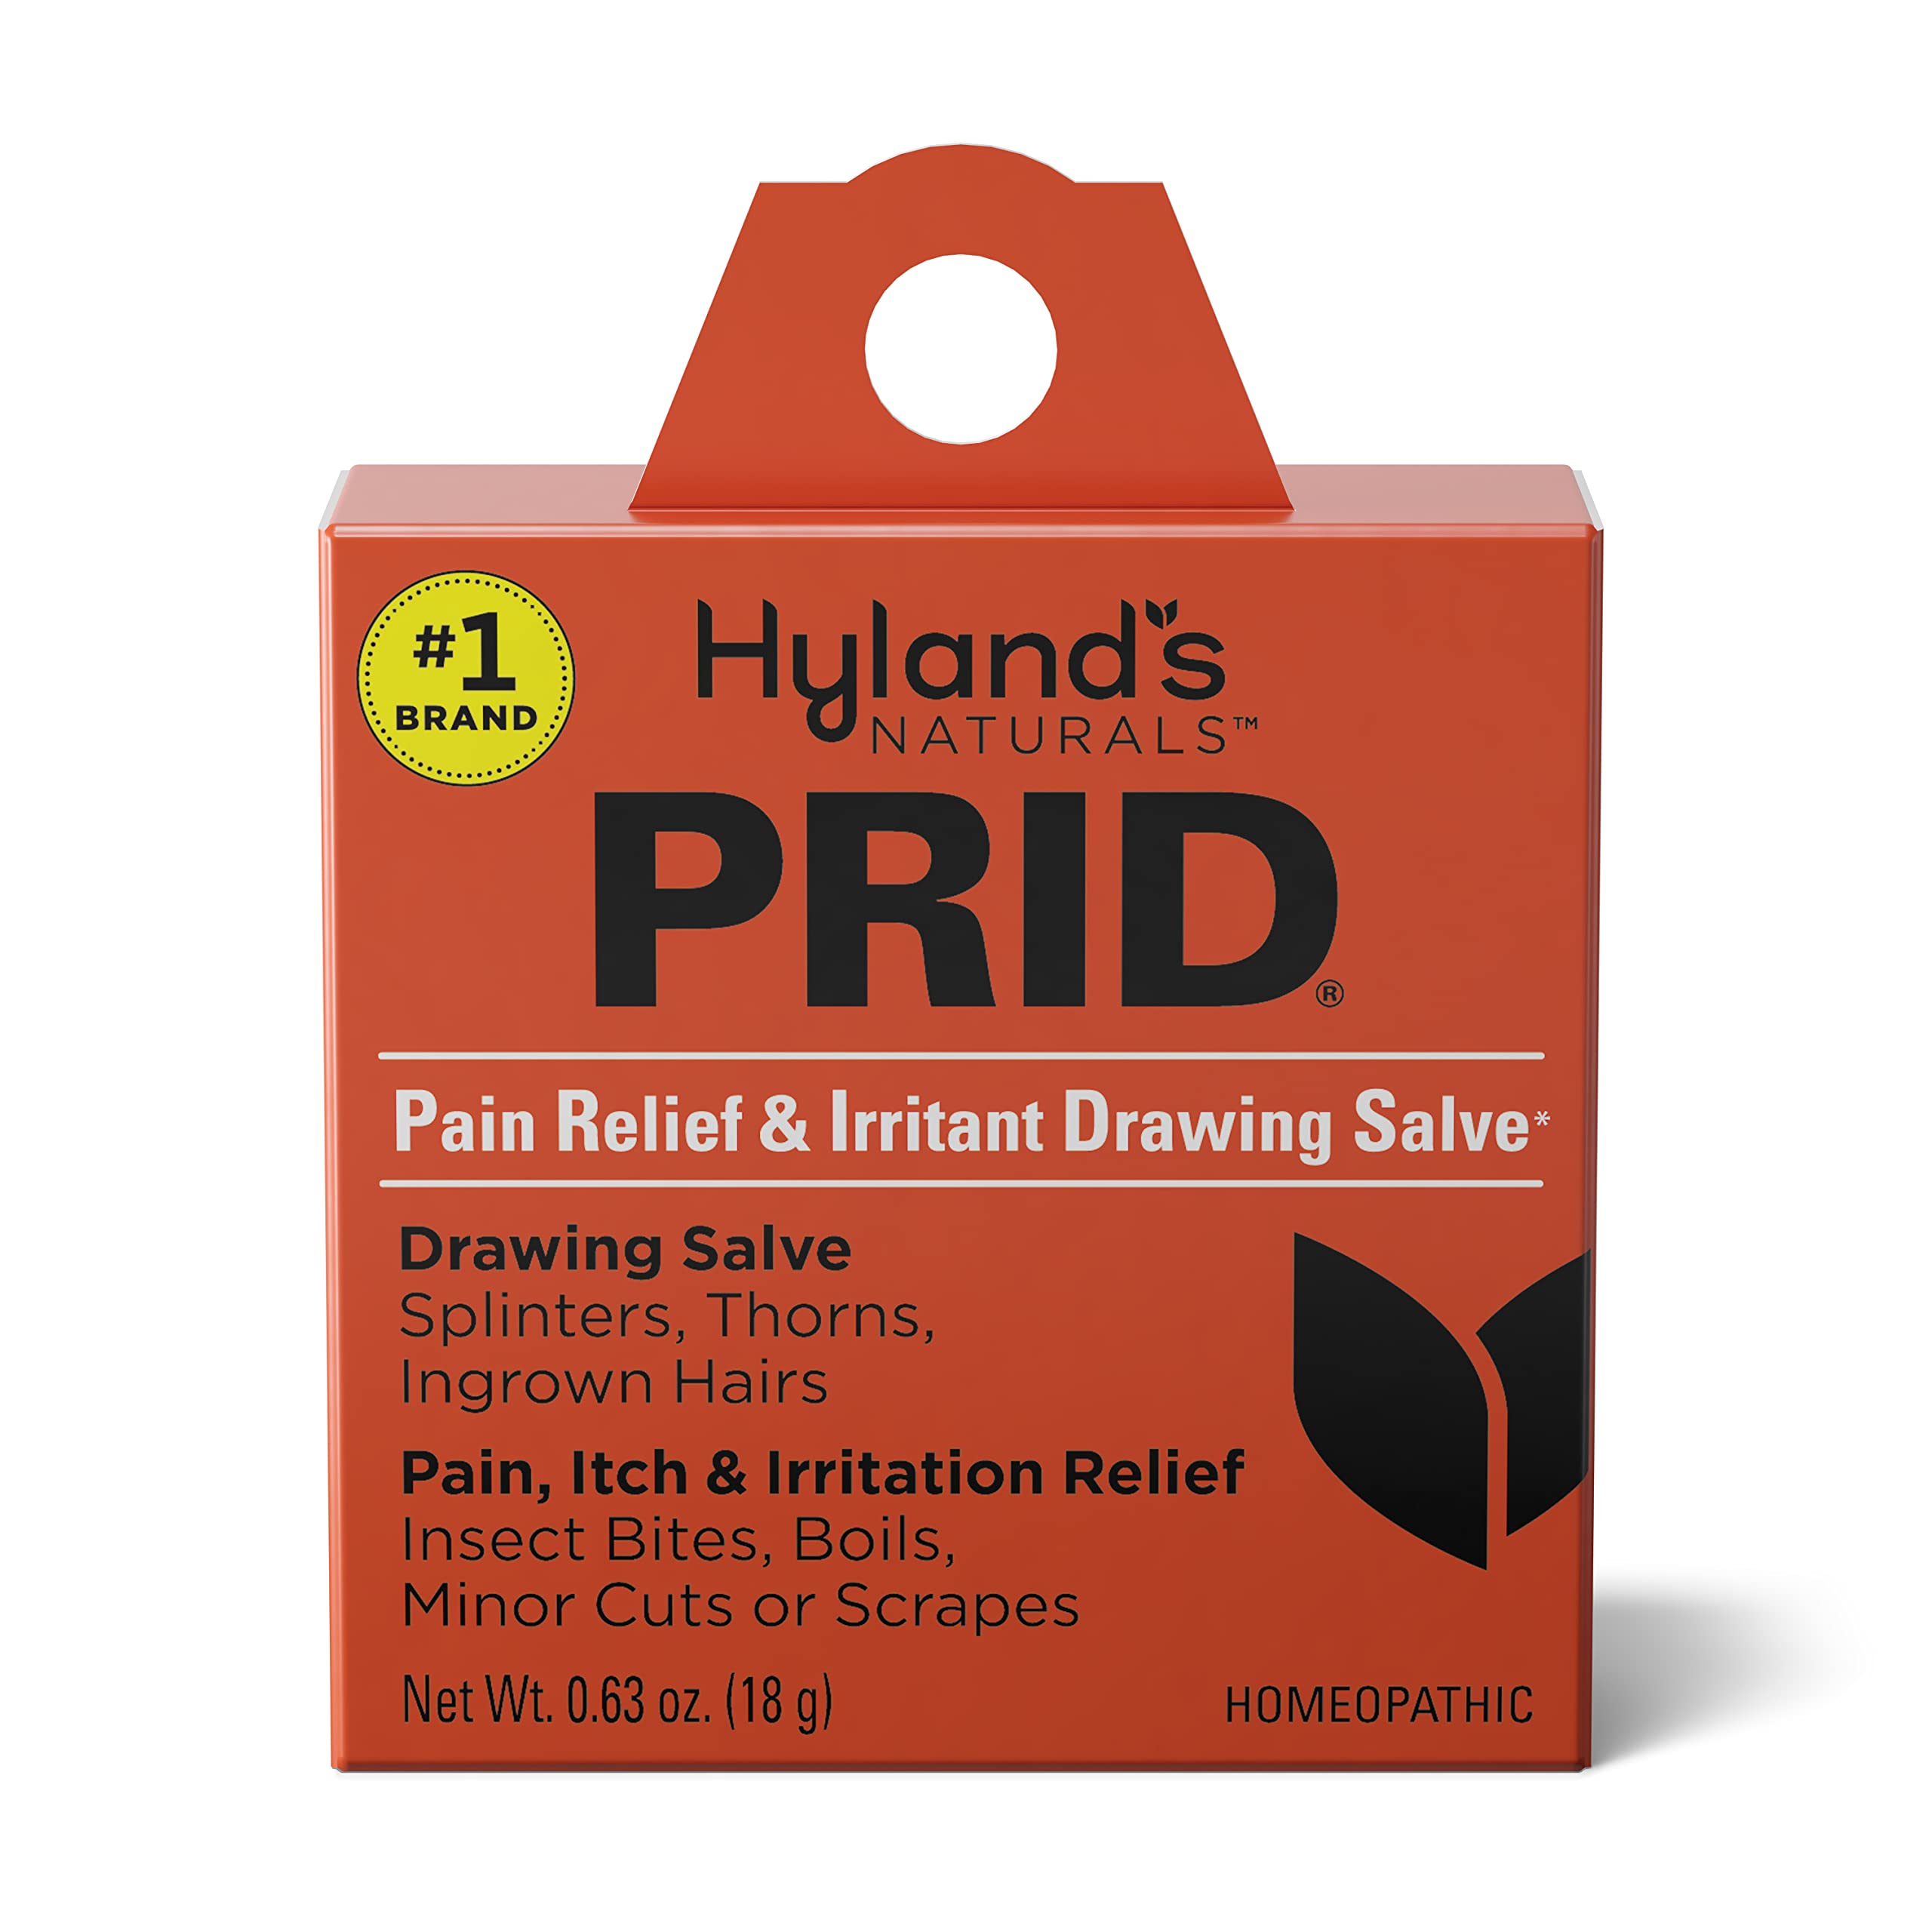 Hyland’s Naturals PRID Drawing Salve, Topical Skin Irritation Relief, For Splinters, Thorns, Ingrown Hairs, Itch Relief for Bug Bites, Boils, Minor Cuts & Scrapes, 18 Grams